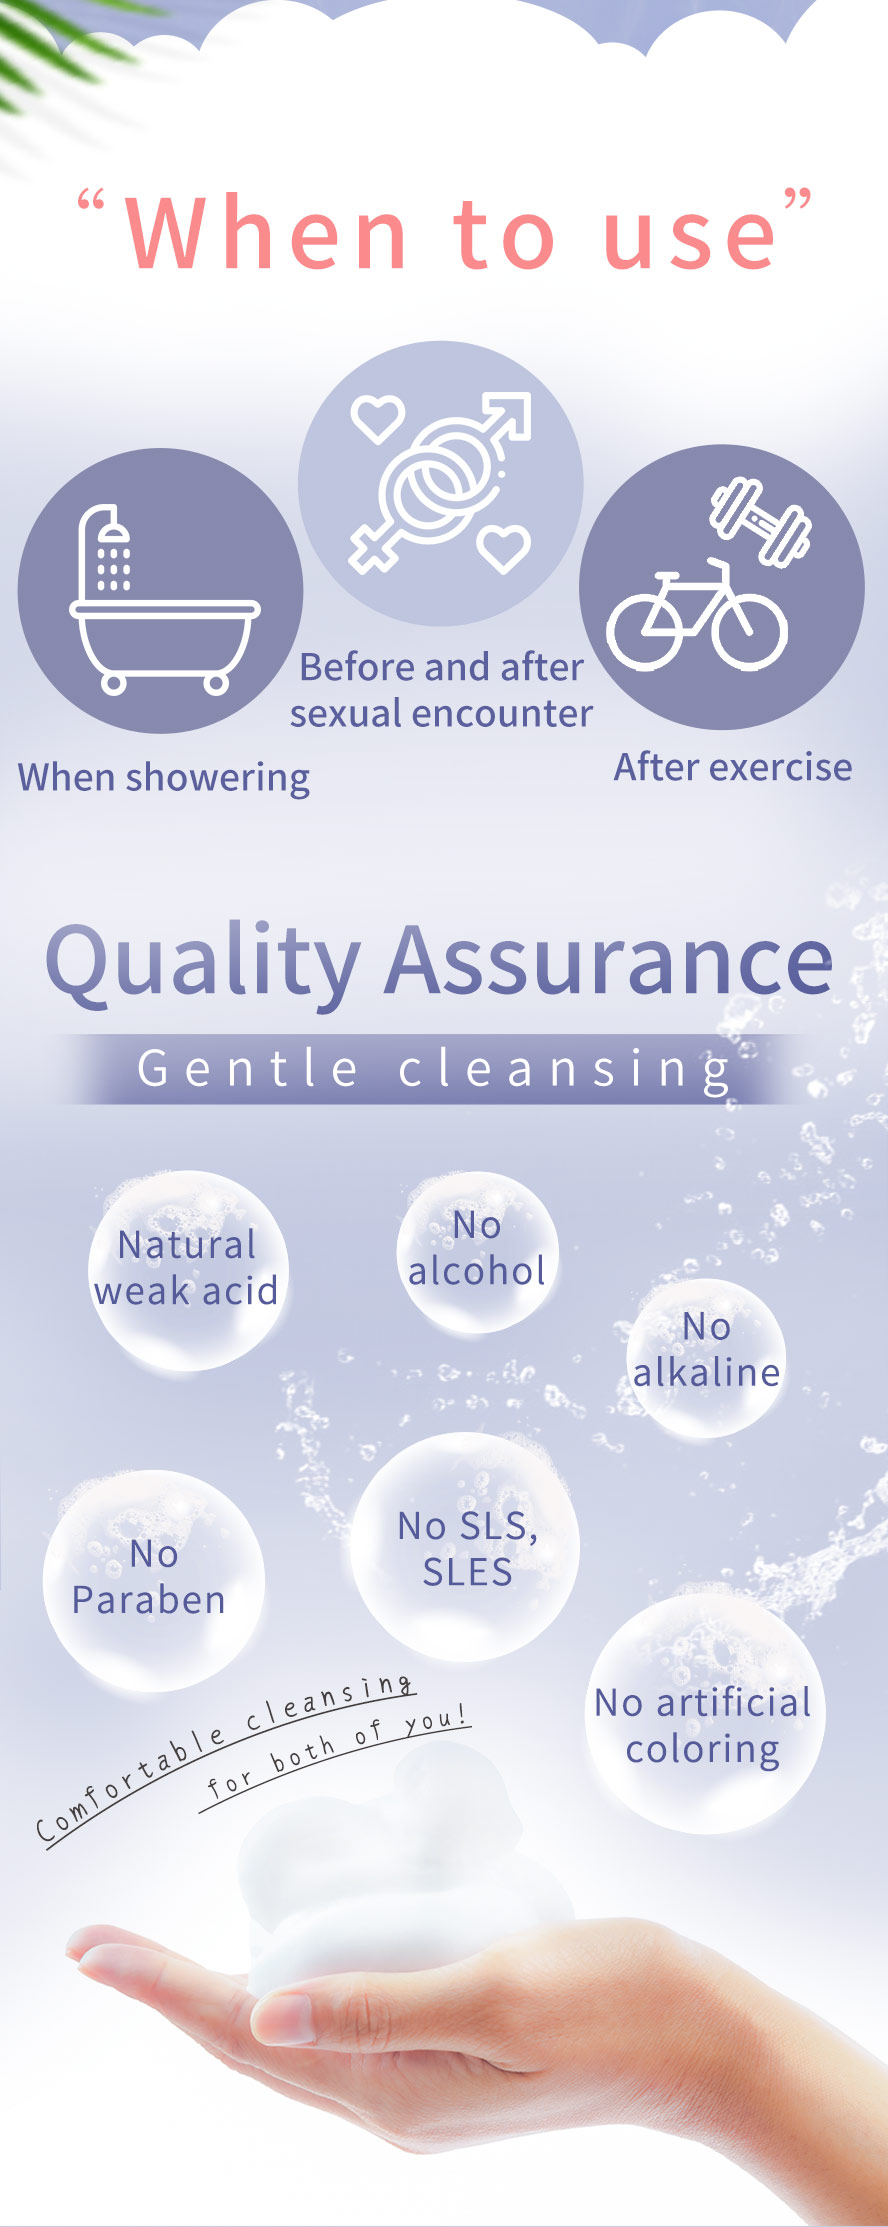 Use BHK's intimate cleansing mousse and UNIQMAN intimate cleansing mousse after sex or after exercise.